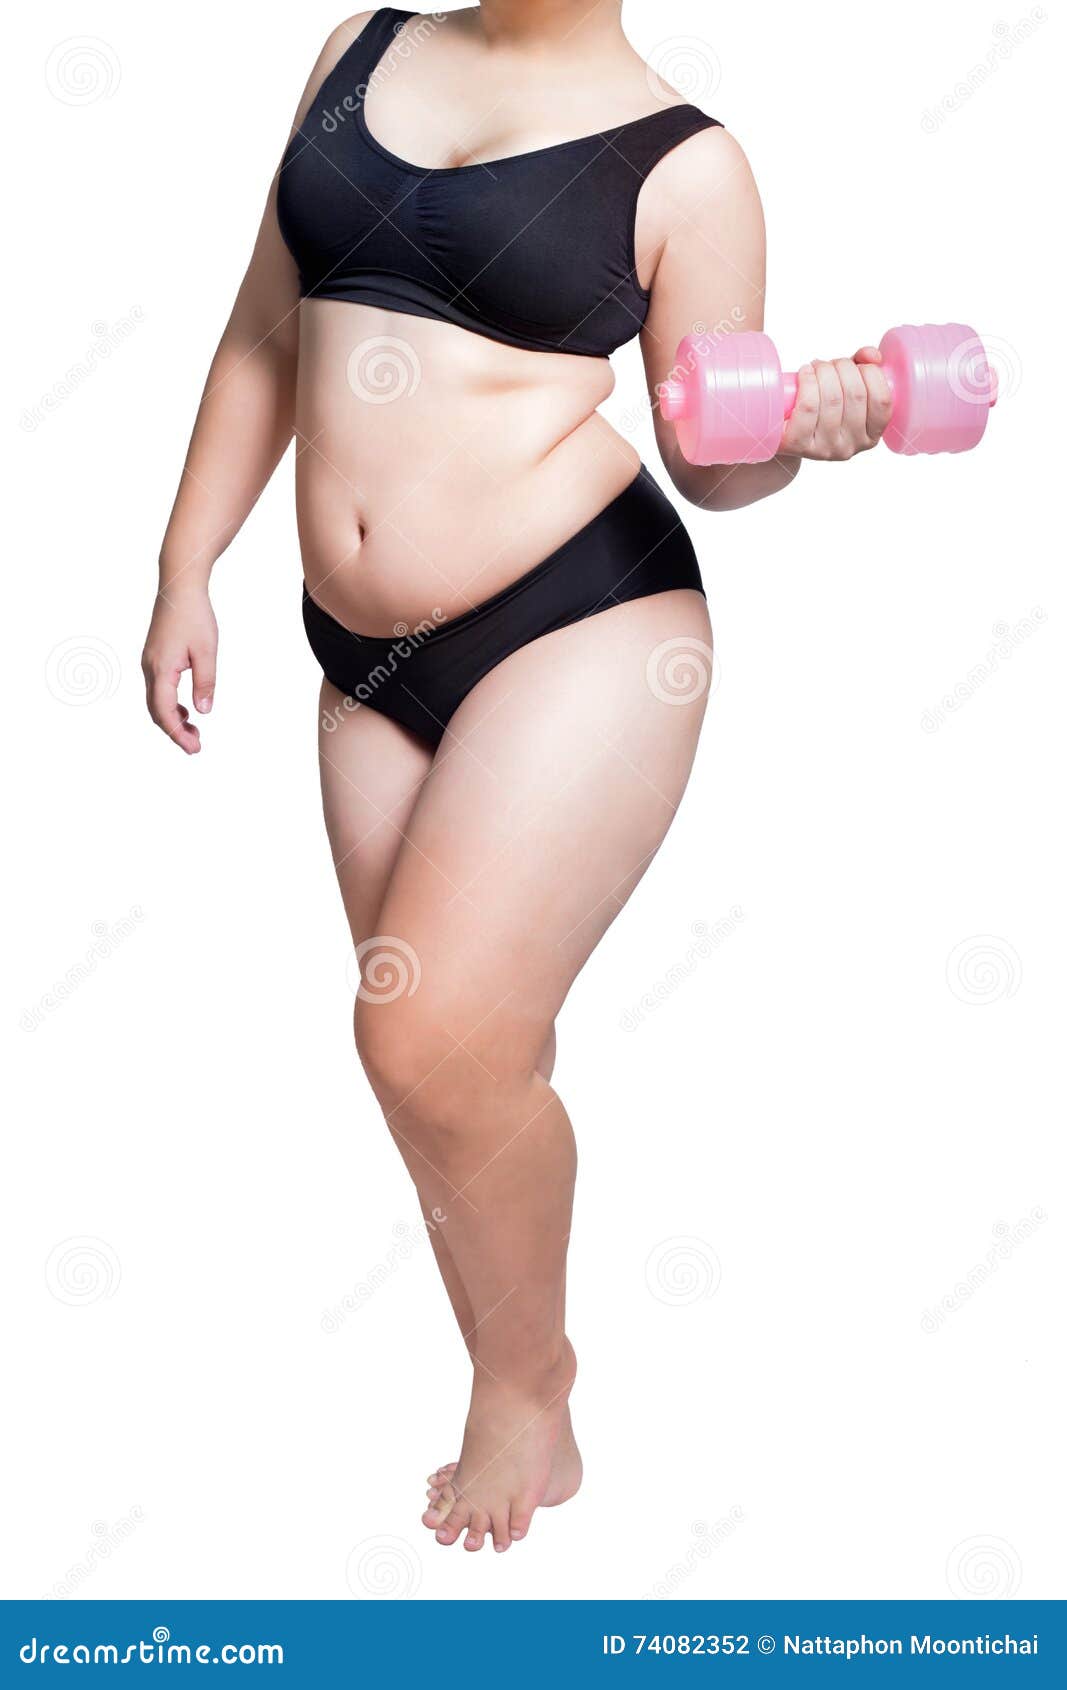 Fat girl in fitness clothes doing exercise with dumbbells on mat at home.  fitness concept for good health. weight control. fat belly, healthy body,  yoga 13095327 Stock Photo at Vecteezy